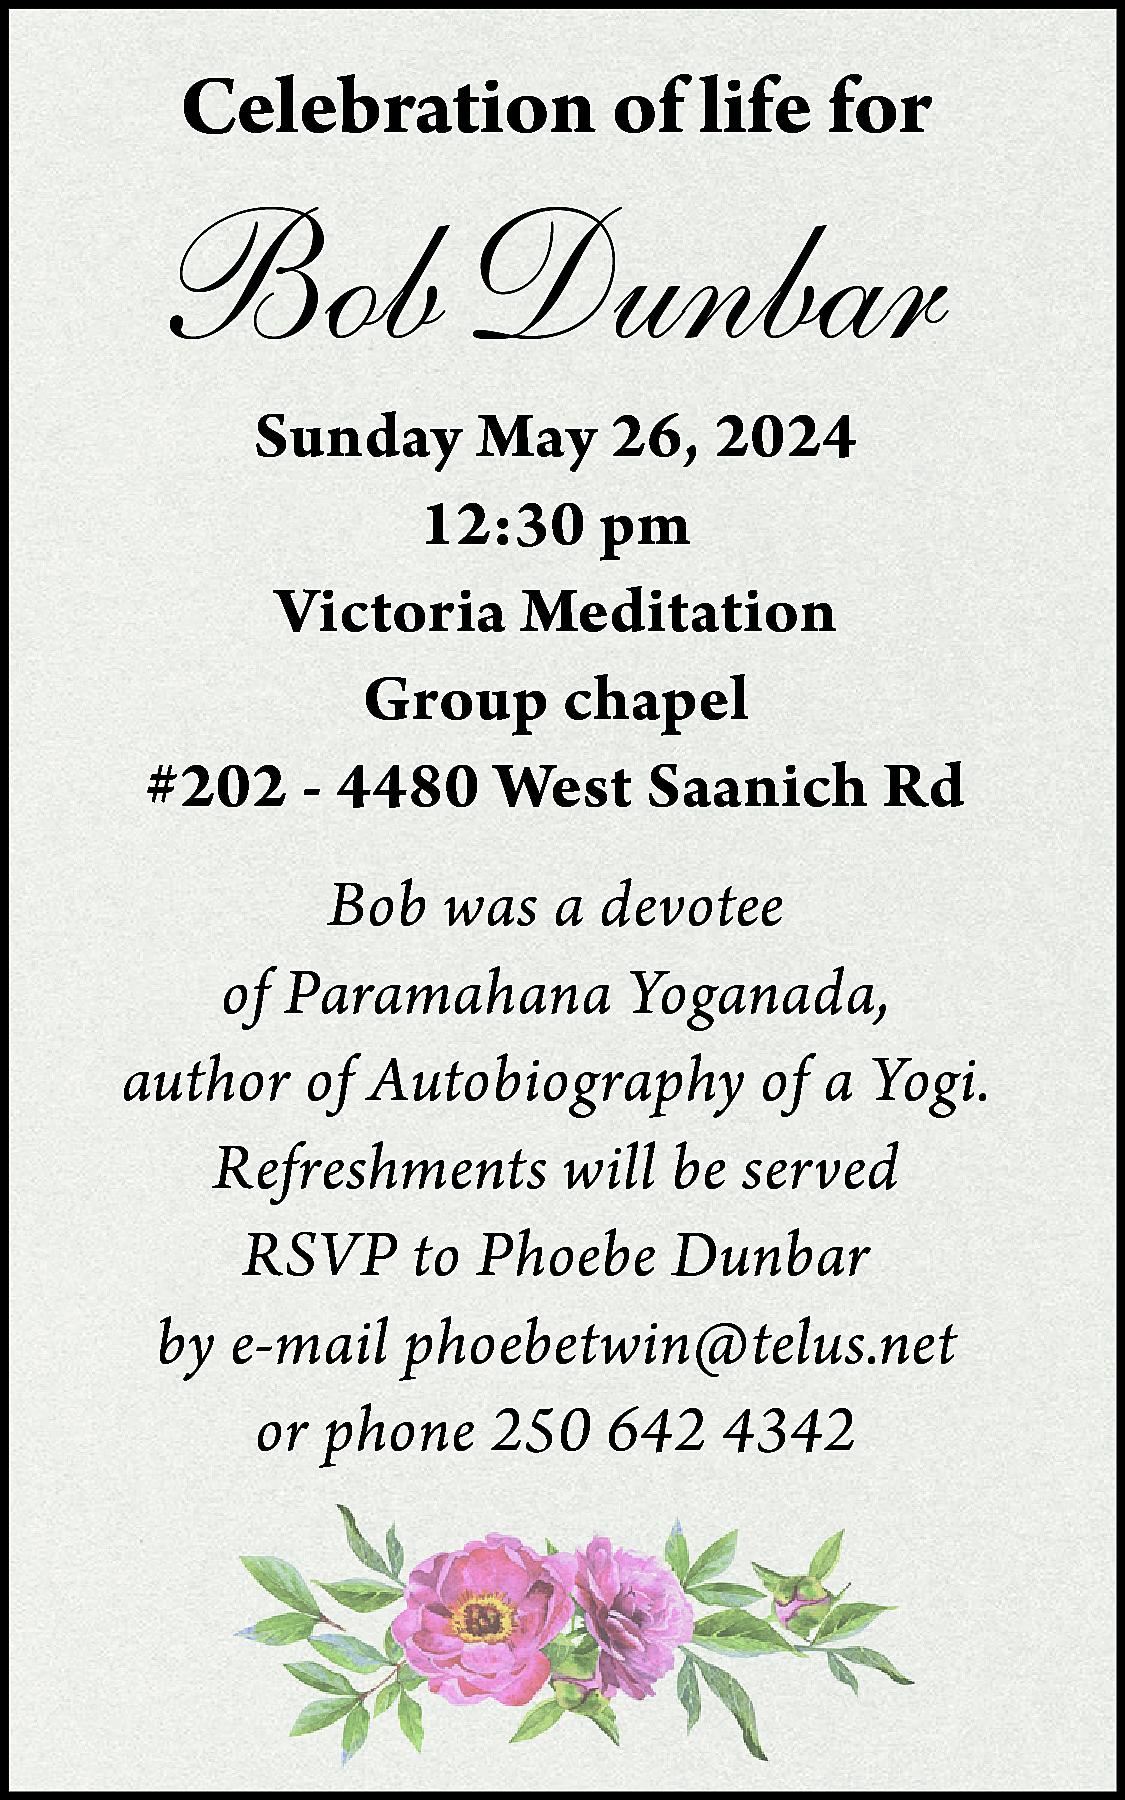 Celebration of life for <br>  Celebration of life for    Bob Dunbar    Sunday May 26, 2024  12:30 pm  Victoria Meditation  Group chapel  #202 - 4480 West Saanich Rd  Bob was a devotee  of Paramahana Yoganada,  author of Autobiography of a Yogi.  Refreshments will be served  RSVP to Phoebe Dunbar  by e-mail phoebetwin@telus.net  or phone 250 642 4342    